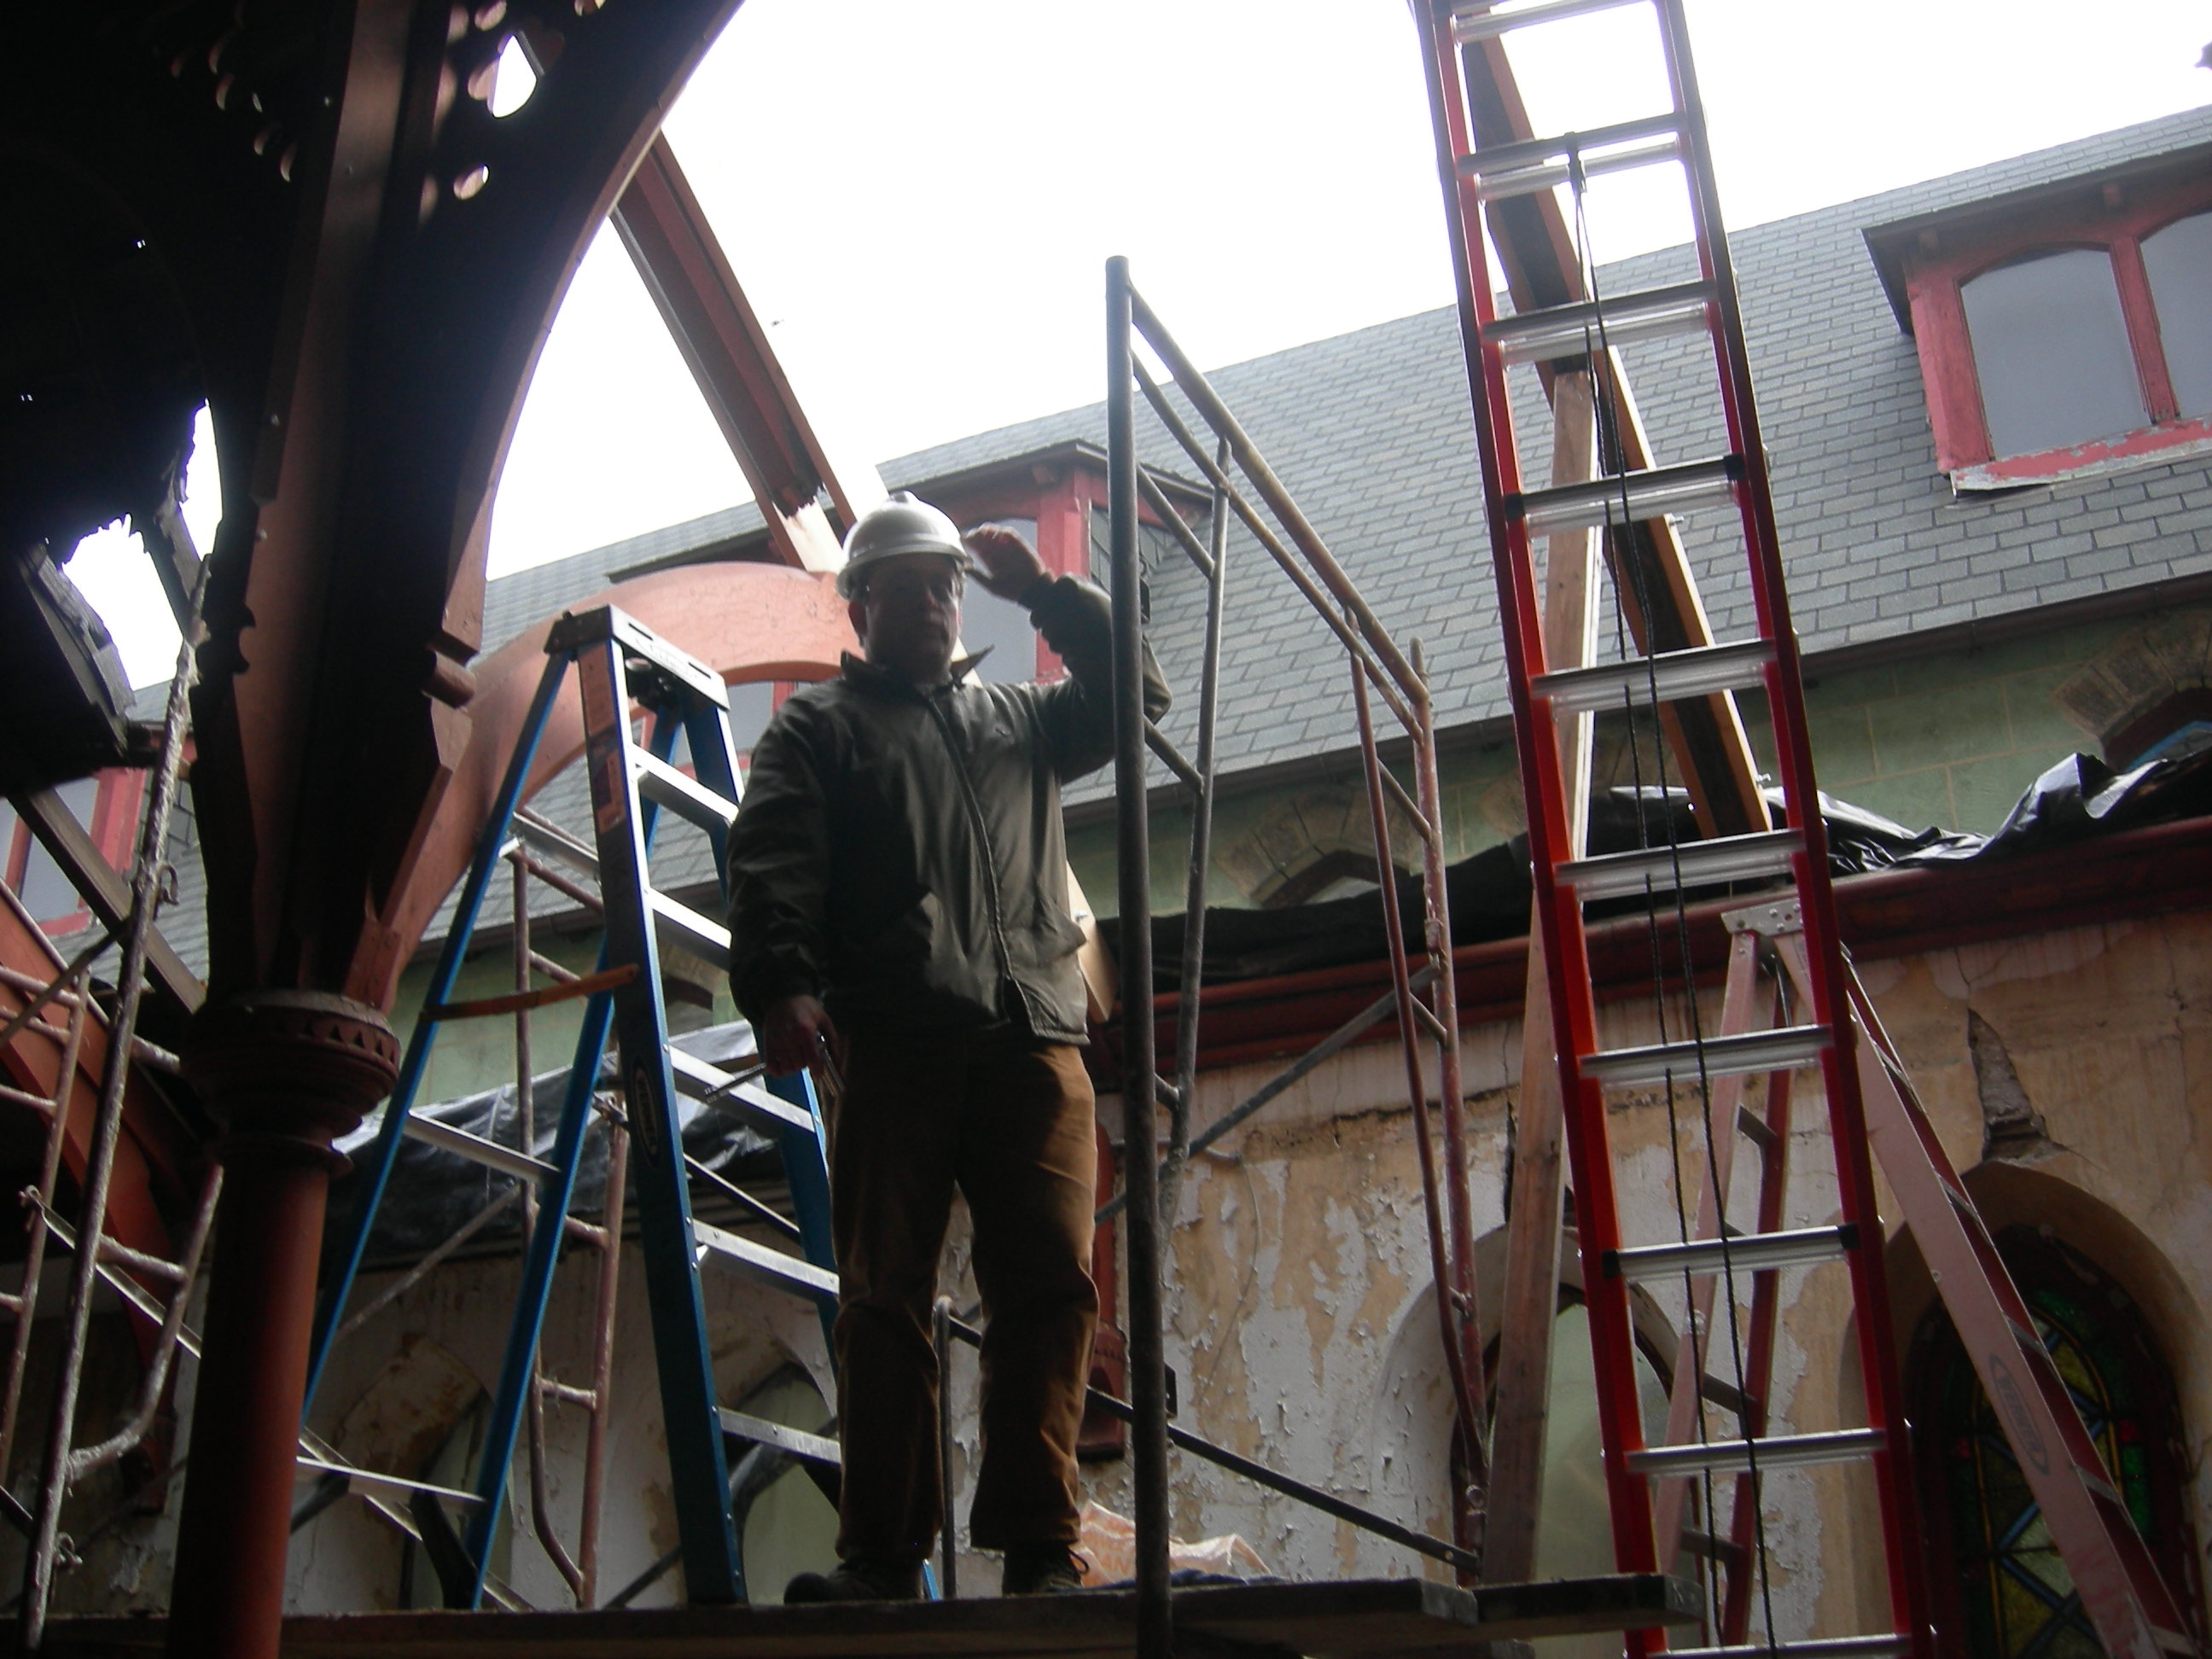 Aaron Wunsch, professor in PennDesign's historic preservation program, on scaffolding during roof repairs. | photo by Melissa Jest, Preservation Alliance for Greater Philadelphia